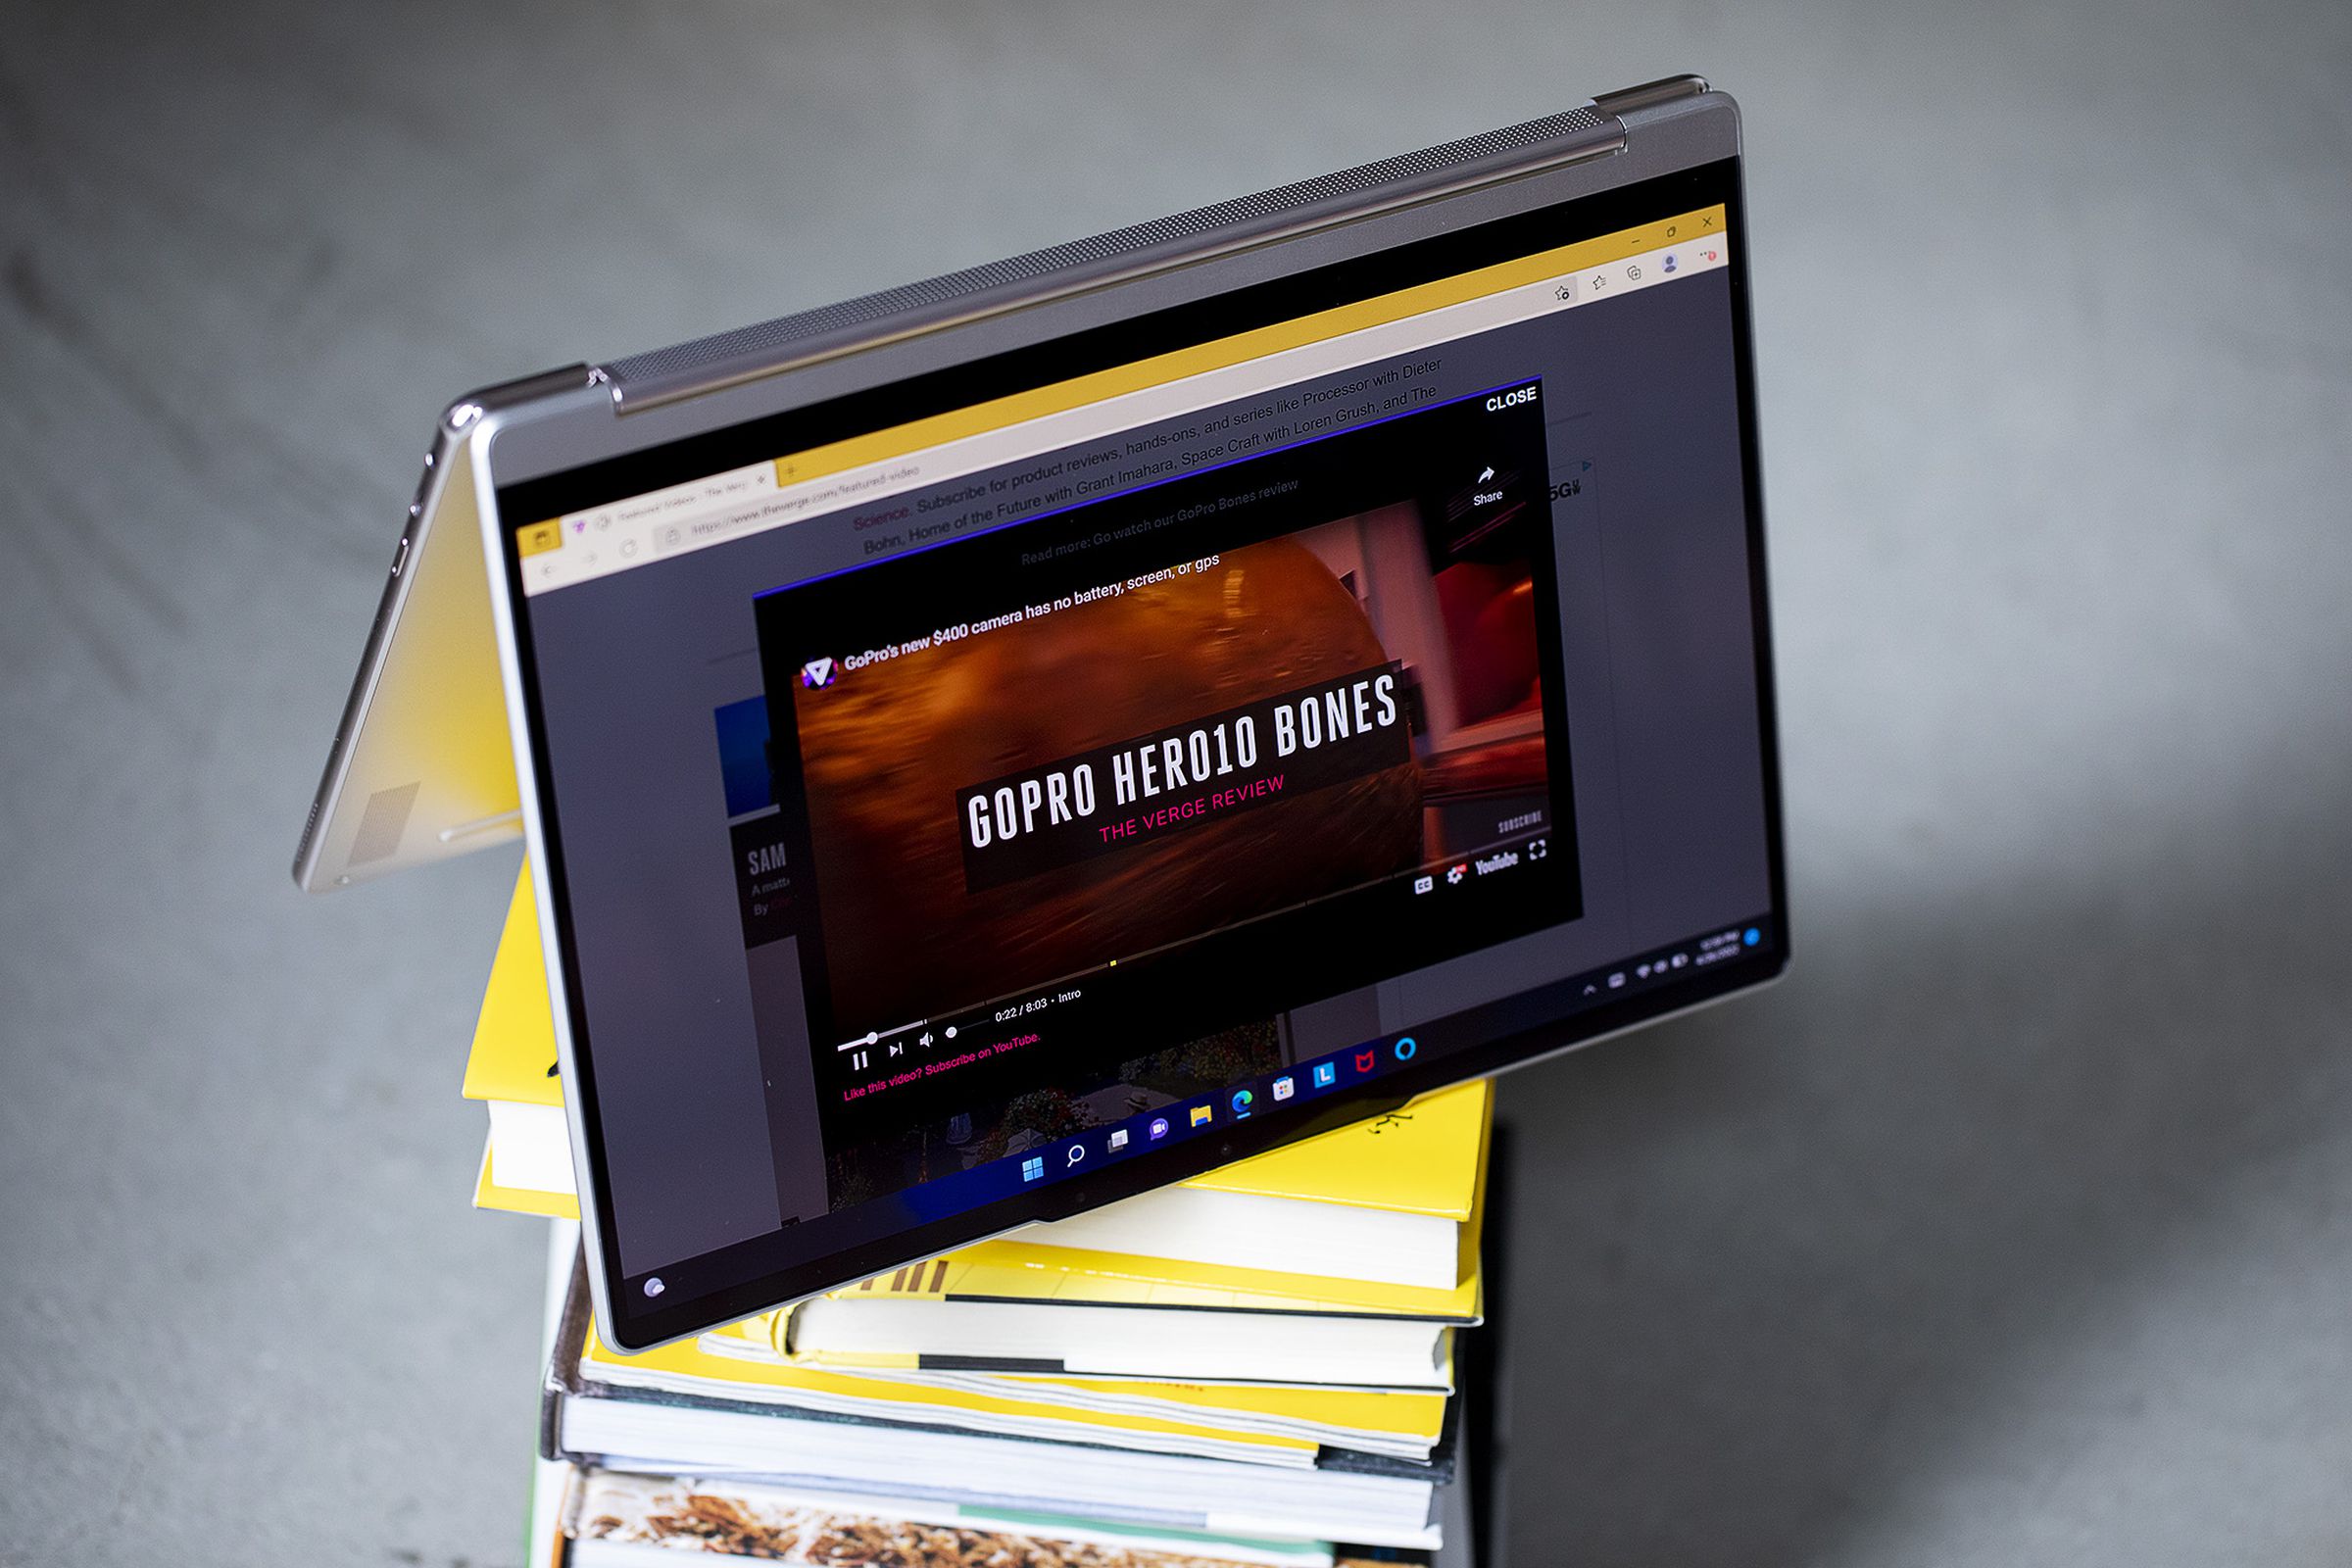 The Lenovo Yoga 9i in tent mode atop a stack of books.